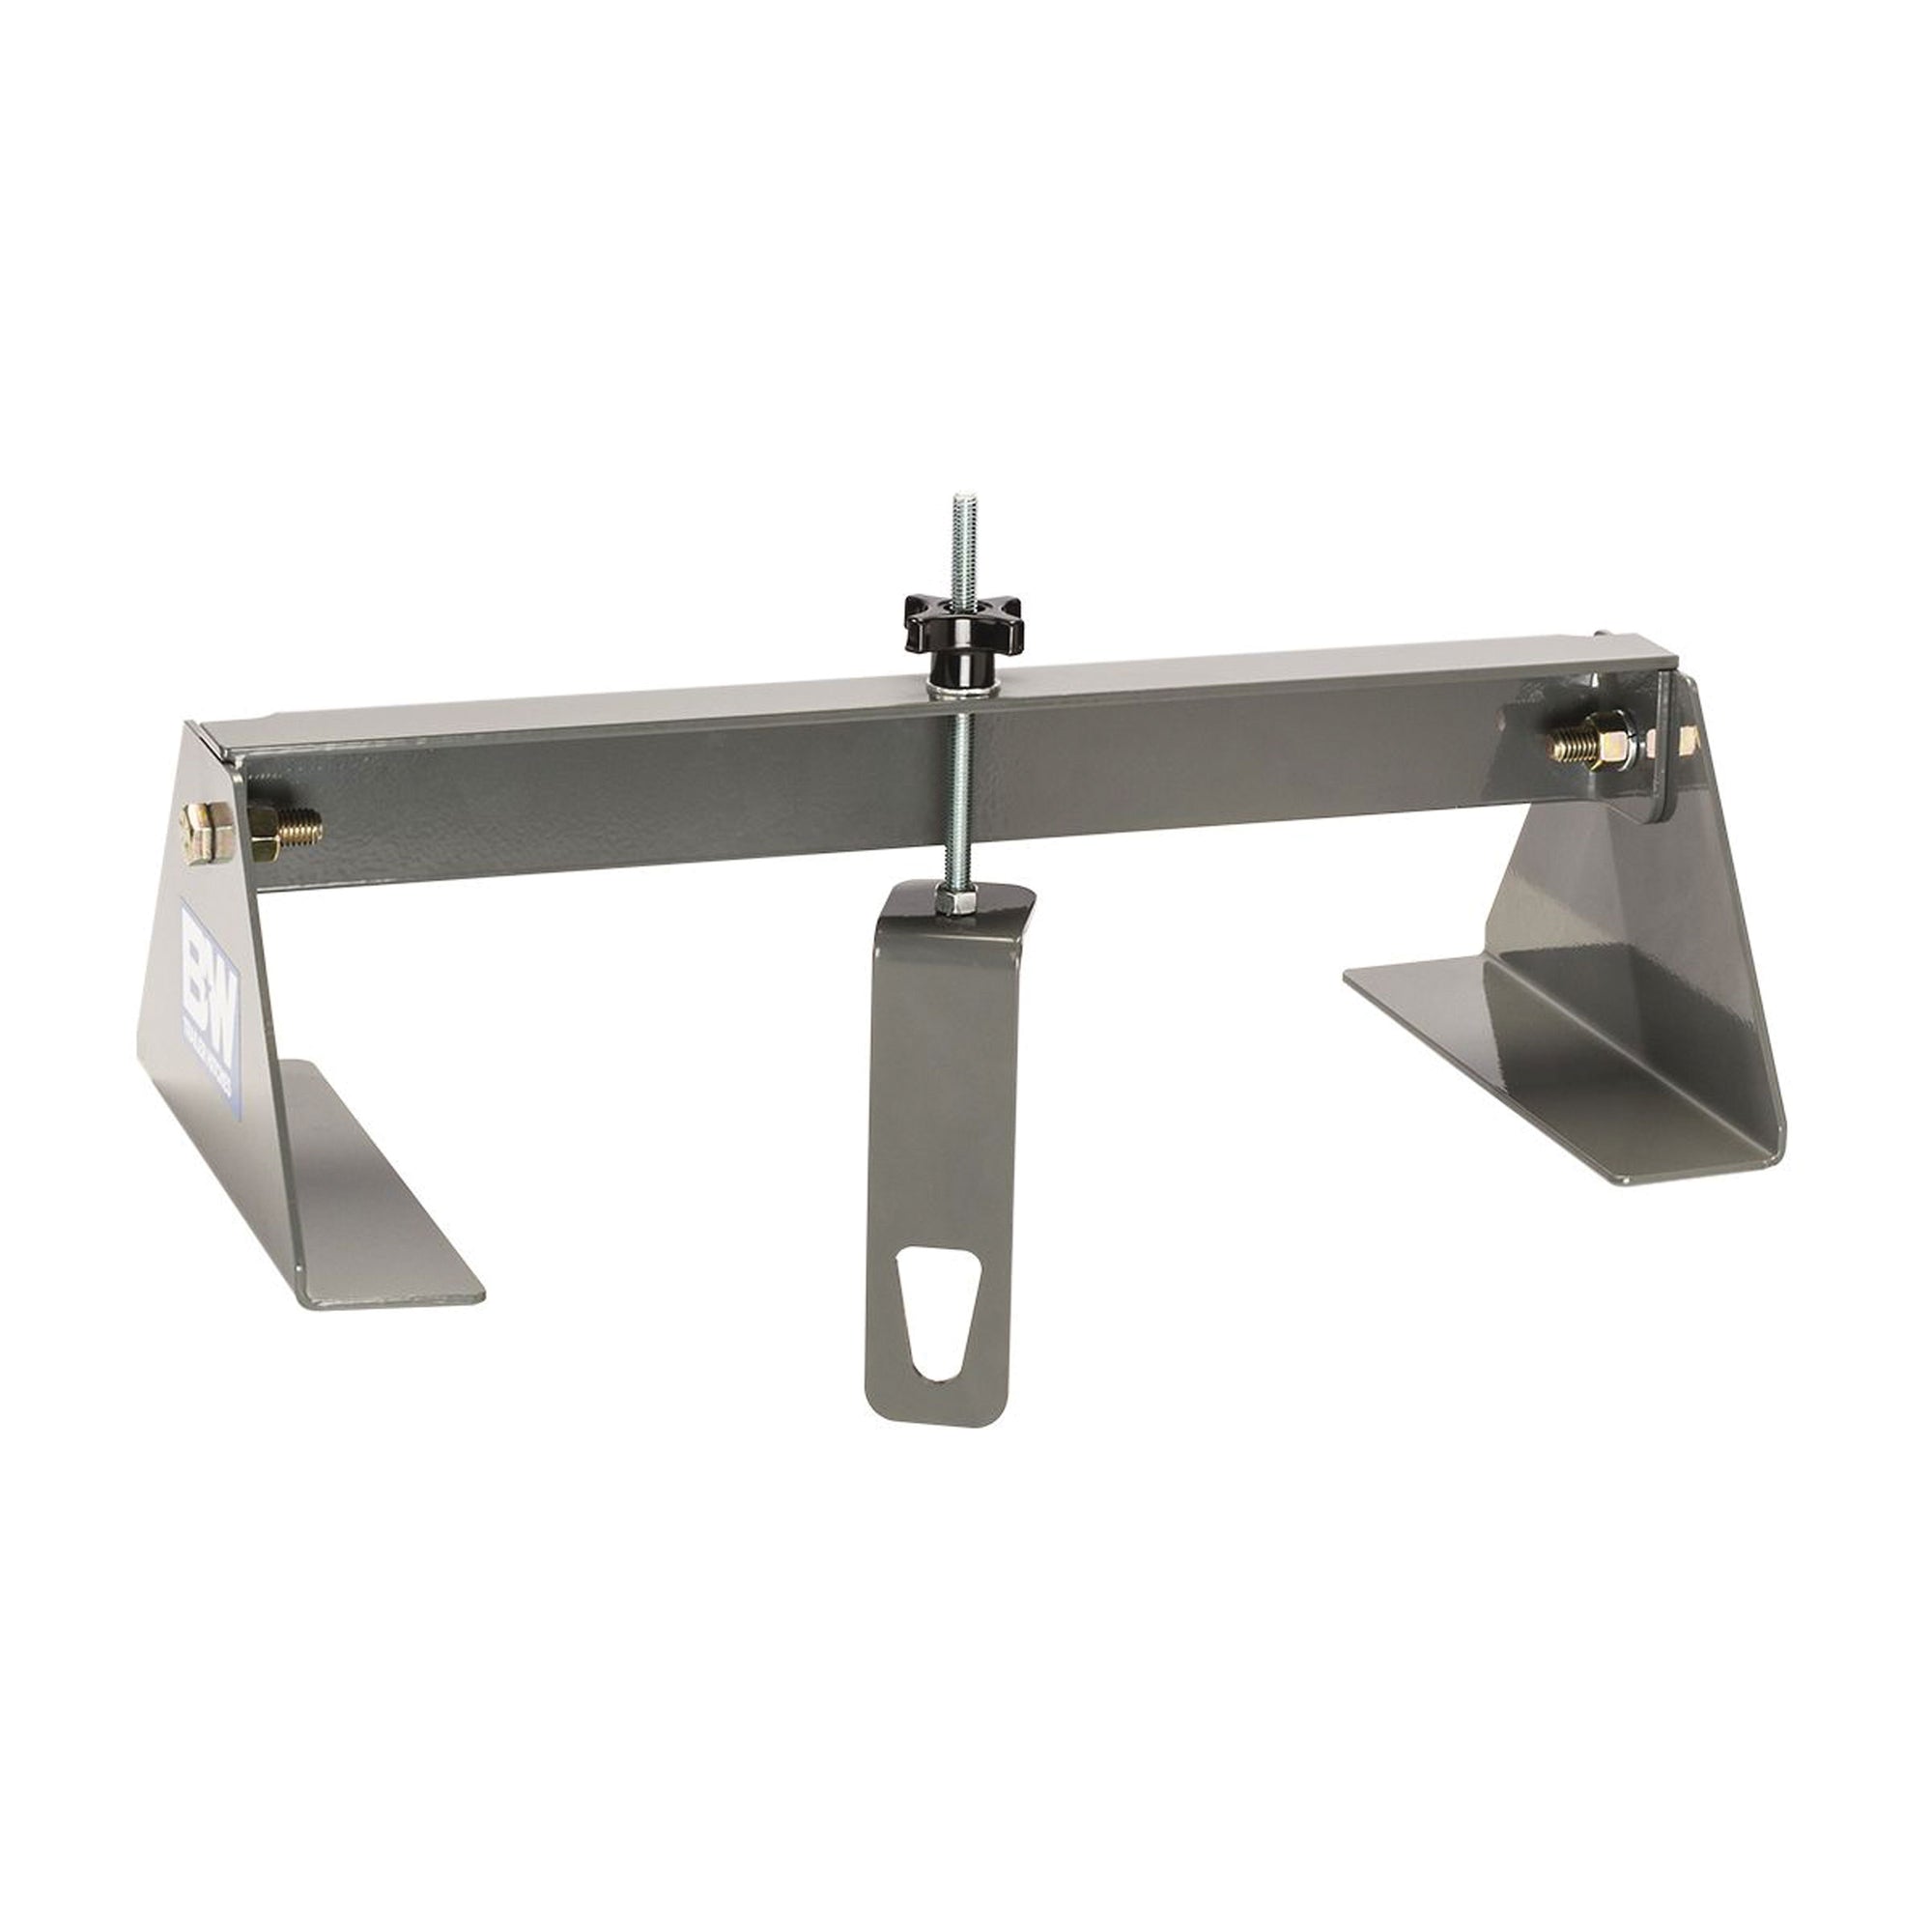 B&W Trailer Hitches GNXA8030 Hitch Helper for Turnoverball Hitch Installation